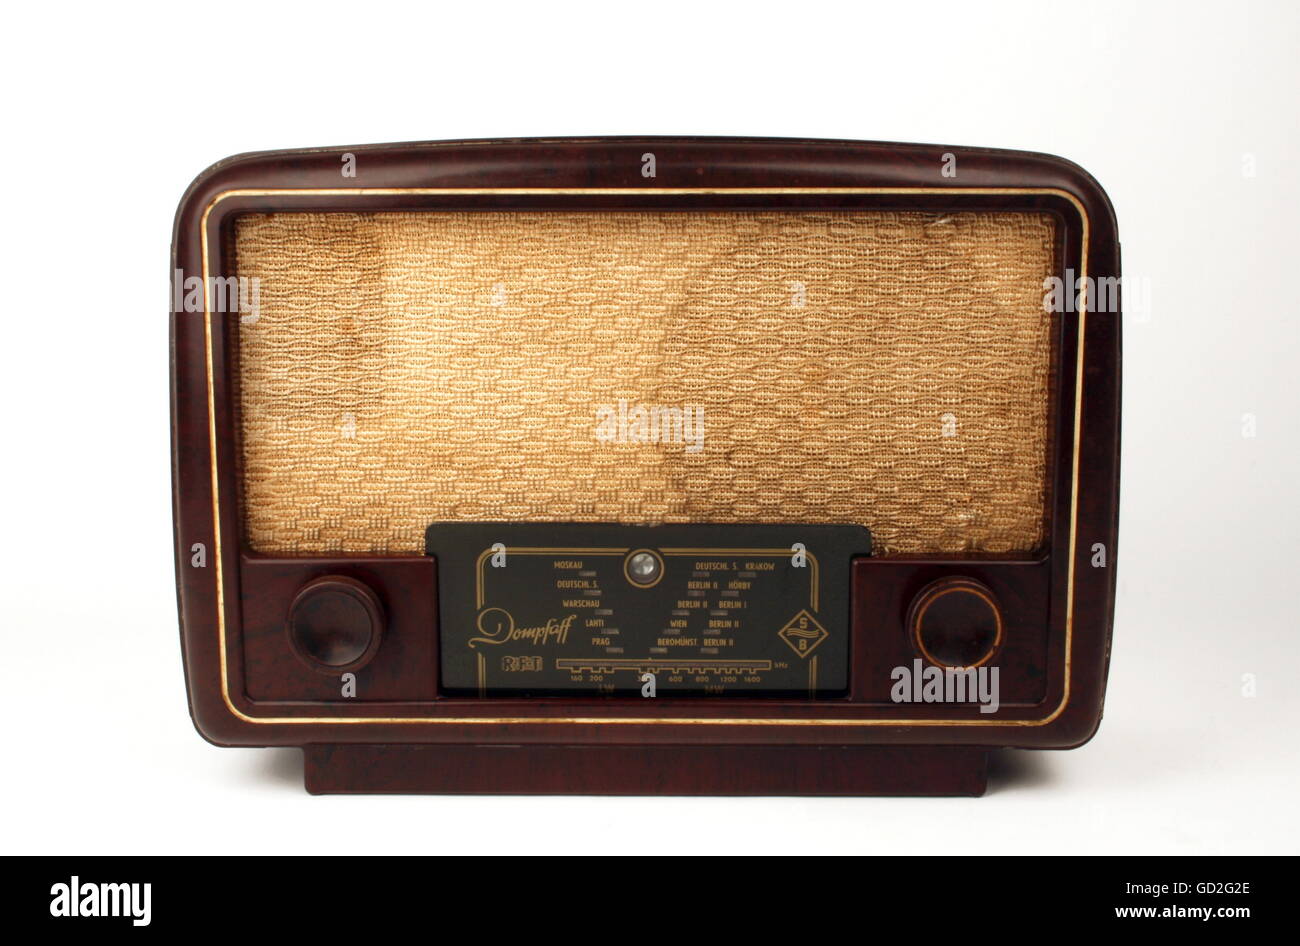 broadcast, radio, home receiver MW/LW 'Dompfaff', design: design by factory, made by: VEB Stern-Radio Berlin, East-Germany, 1953, Additional-Rights-Clearences-Not Available Stock Photo